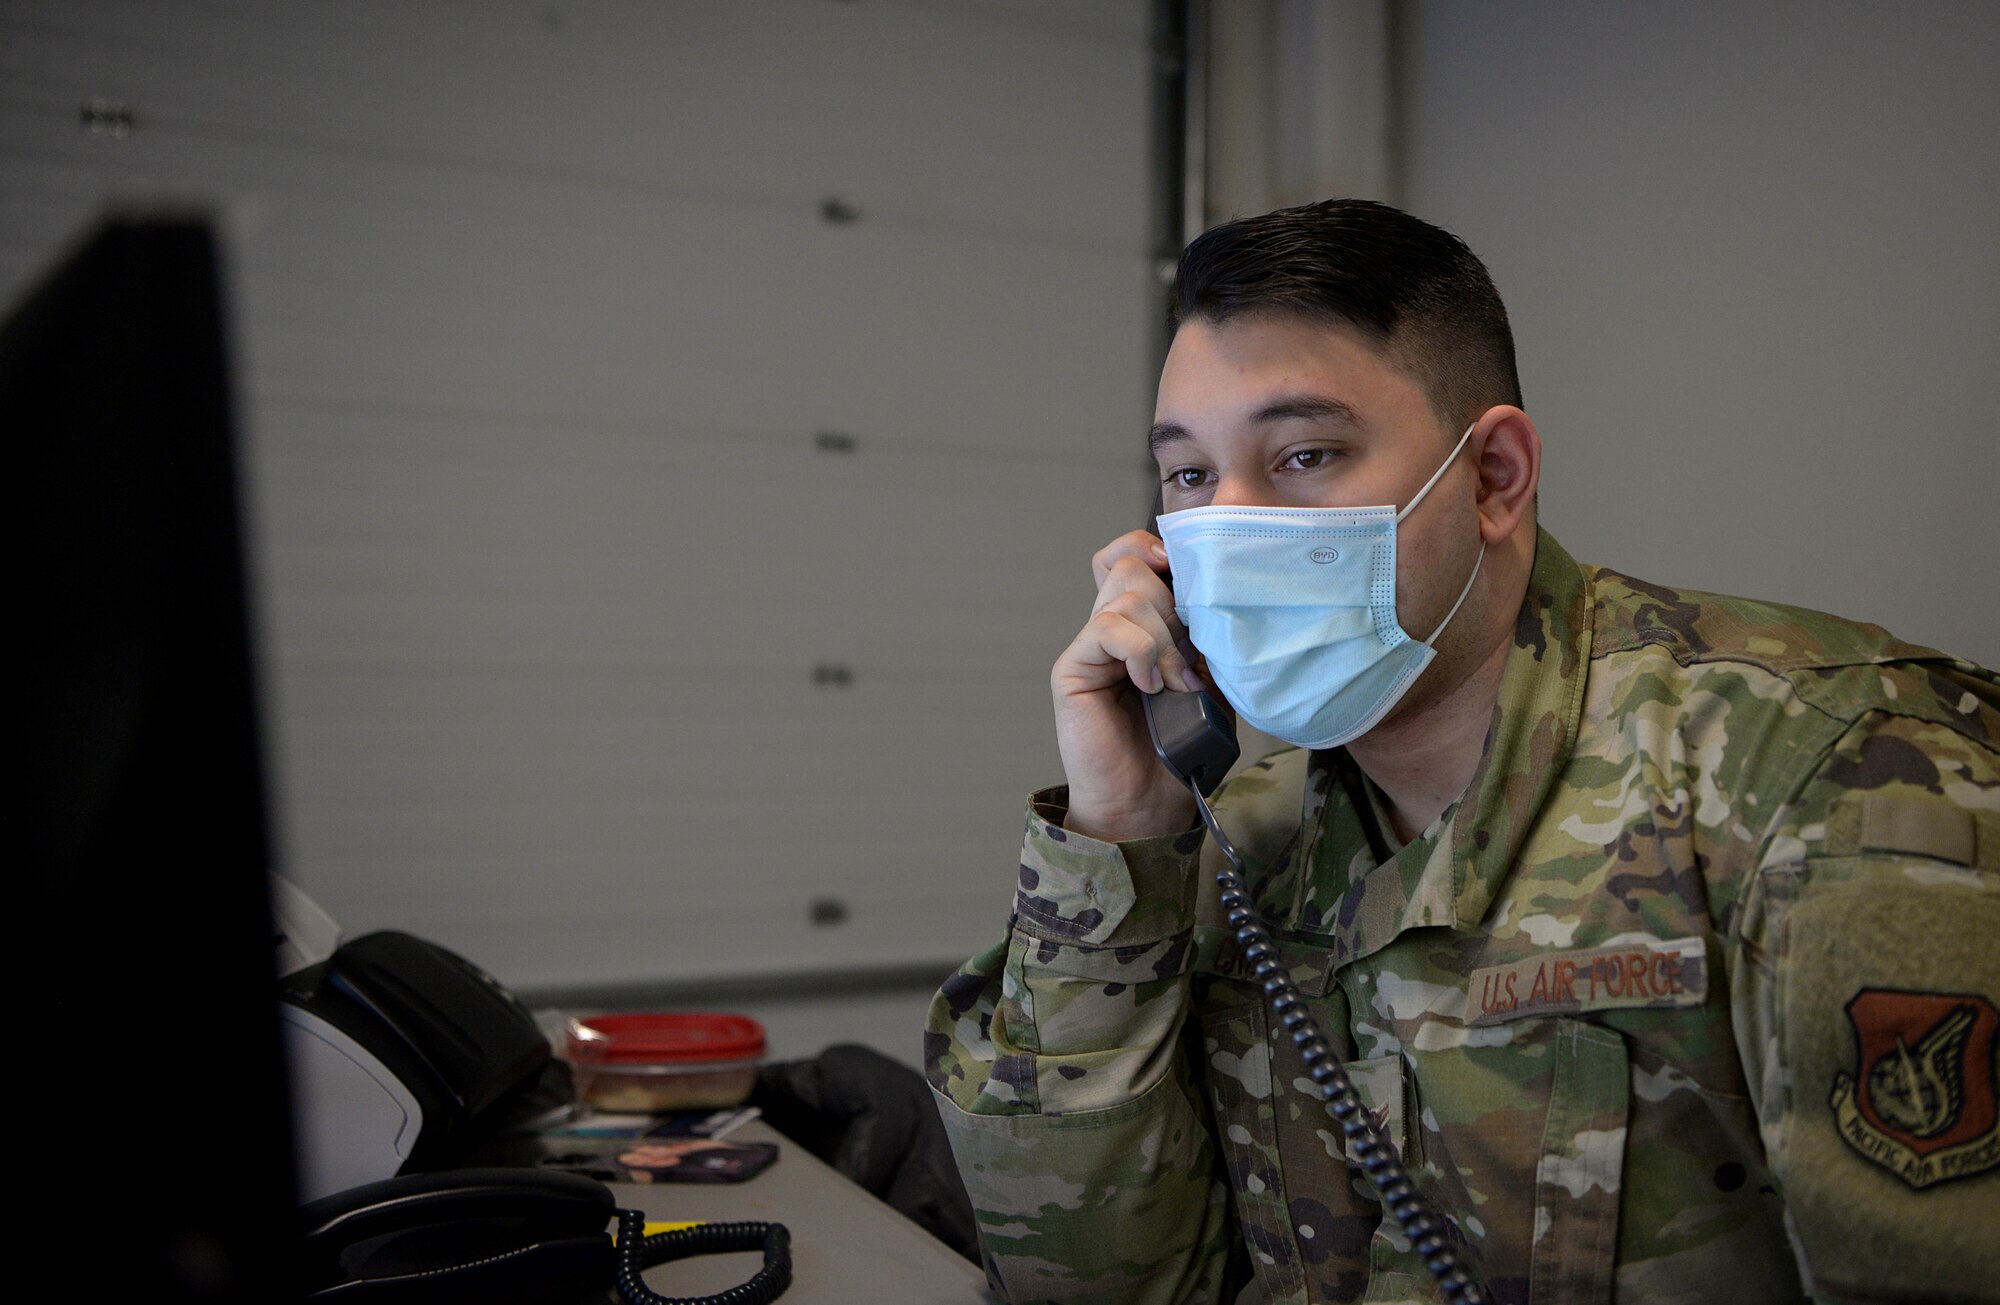 U.S. Air Force Airman 1st Class Giovanni Cruz, 354th Healthcare Operations Squadron health service management specialist, answers a phone call from a patient Jan. 13, 2021 on Eielson Air Force Base, Alaska.. Cruz records COVID-19 tests, logs them into the patient's medical history and works with the 354th Operational Medical Readiness Squadron Public Health Flight to mitigate the spread of the virus. (U.S. Air Force photo by Senior Airman Beaux Hebert)